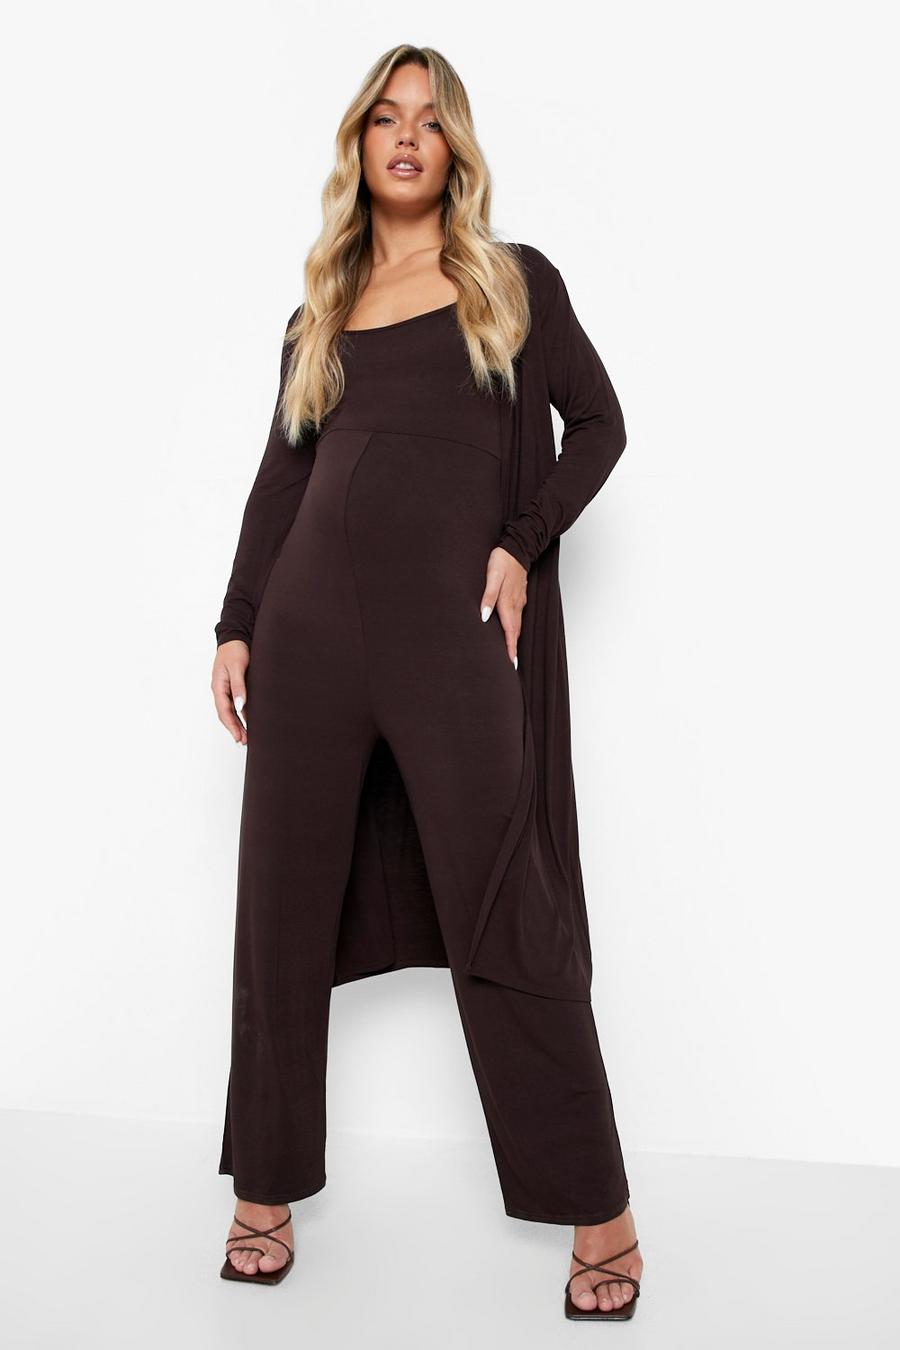 Chocolate marron Maternity Slouchy Jumpsuit And Duster